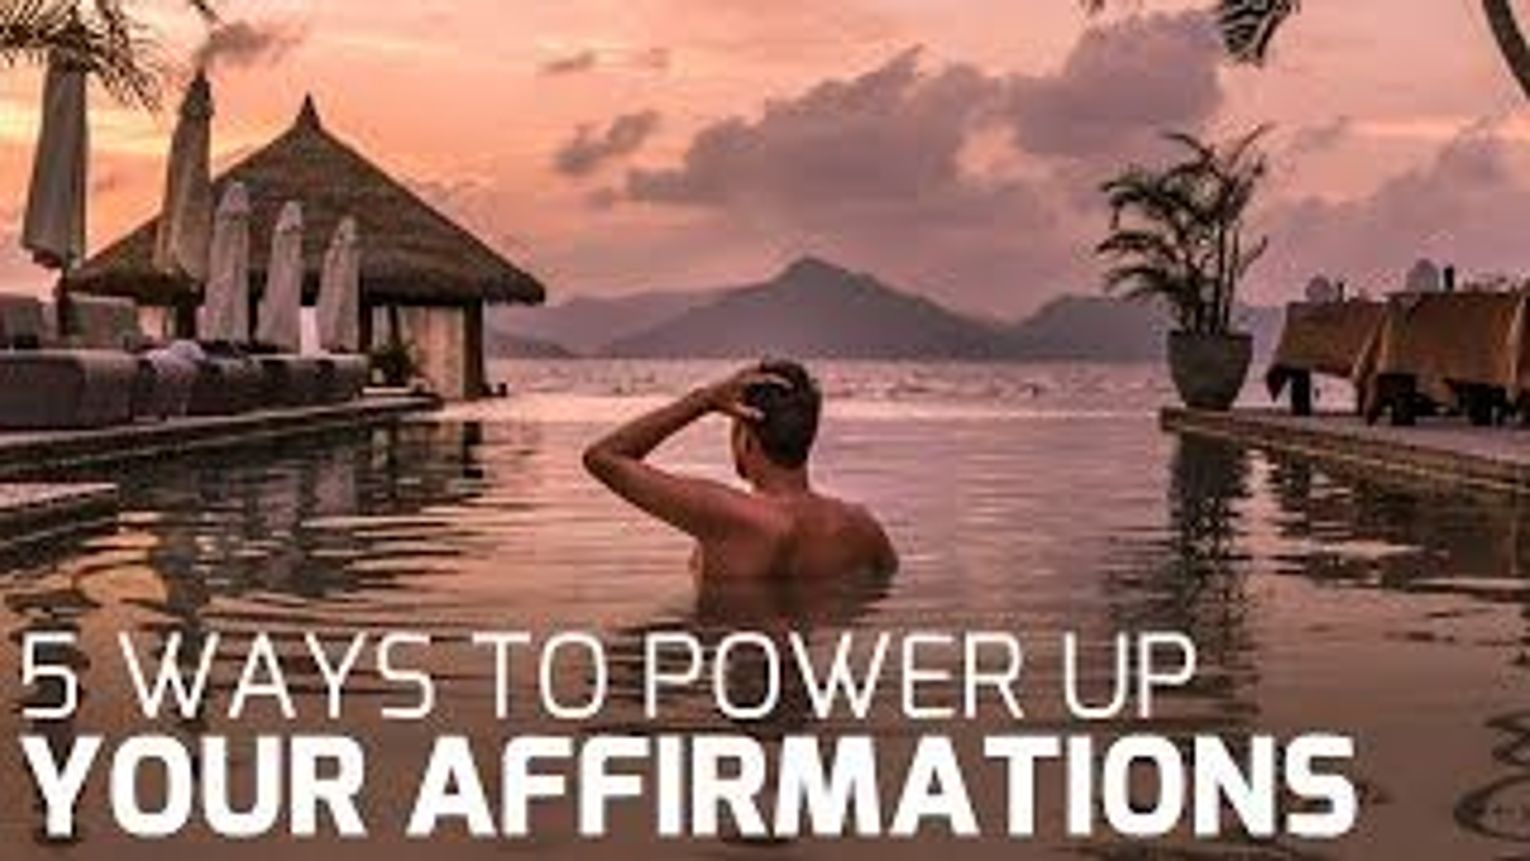 5 Ways to Power Up Your Affirmations and Find Happiness